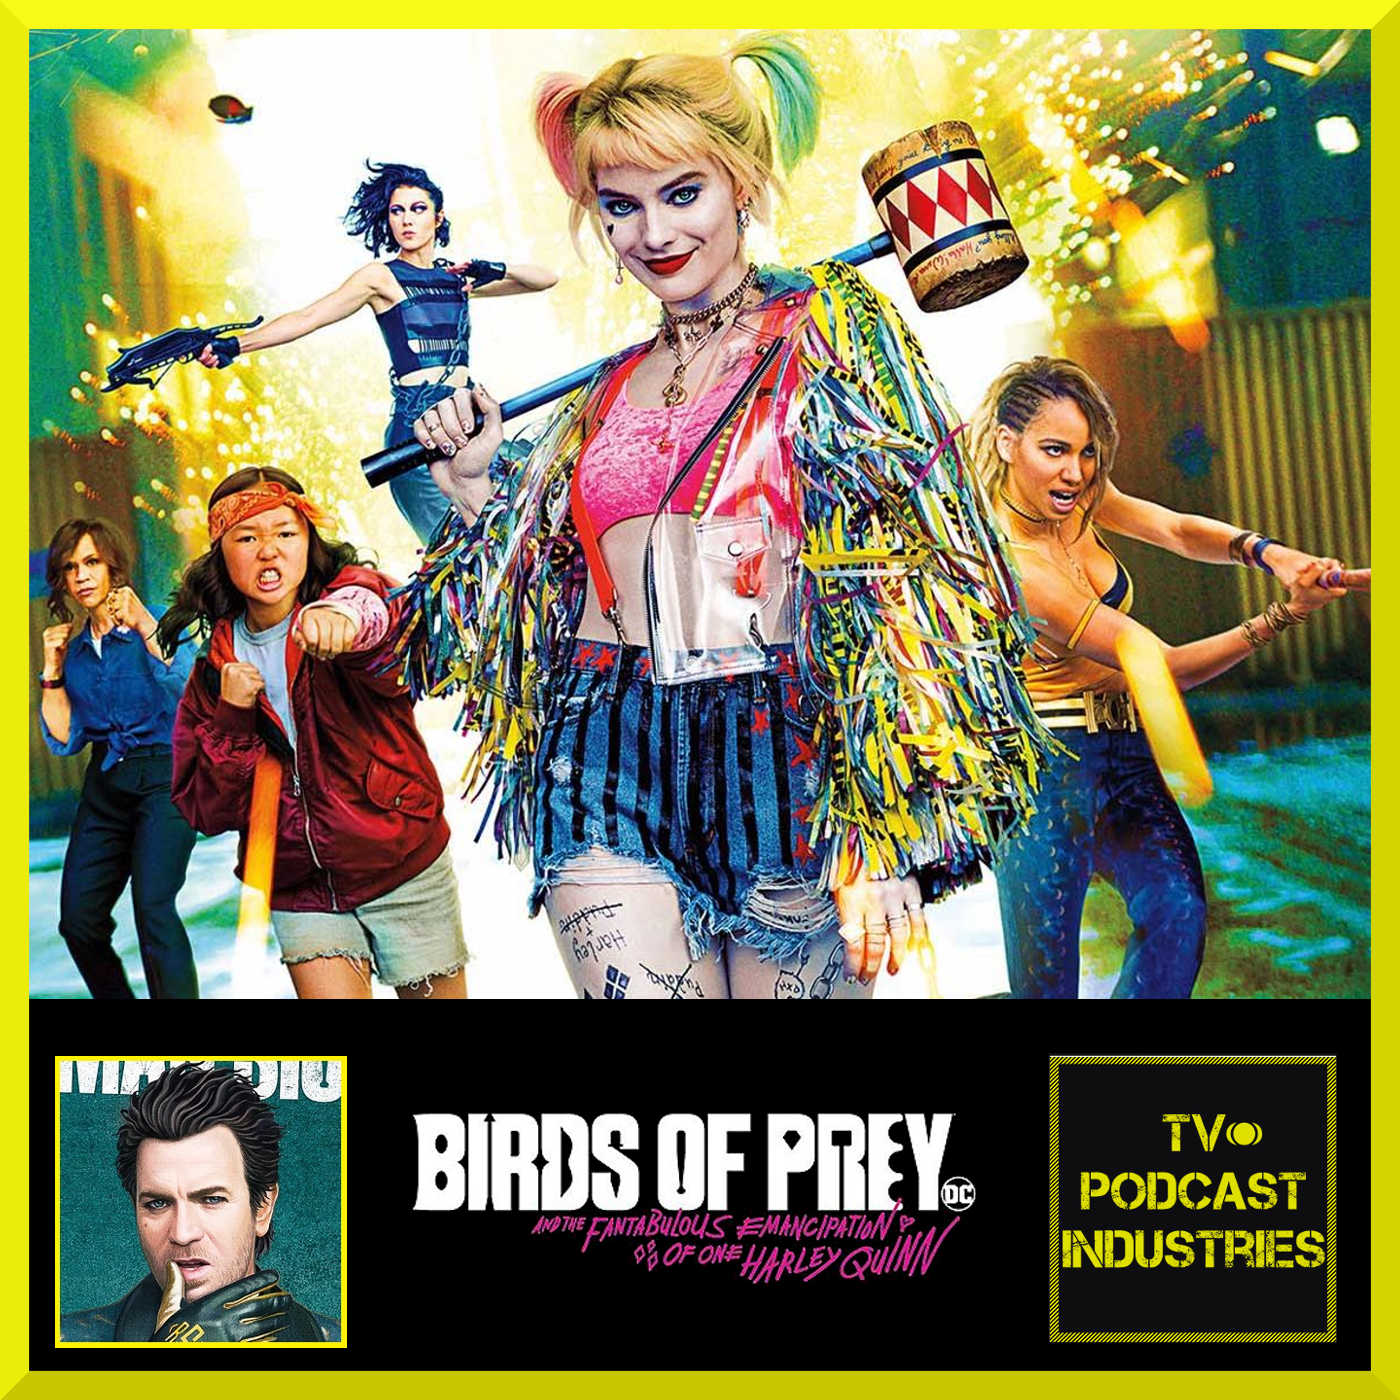 Harley Quinn Birds of Prey Review Podcast by TV Podcast Industries